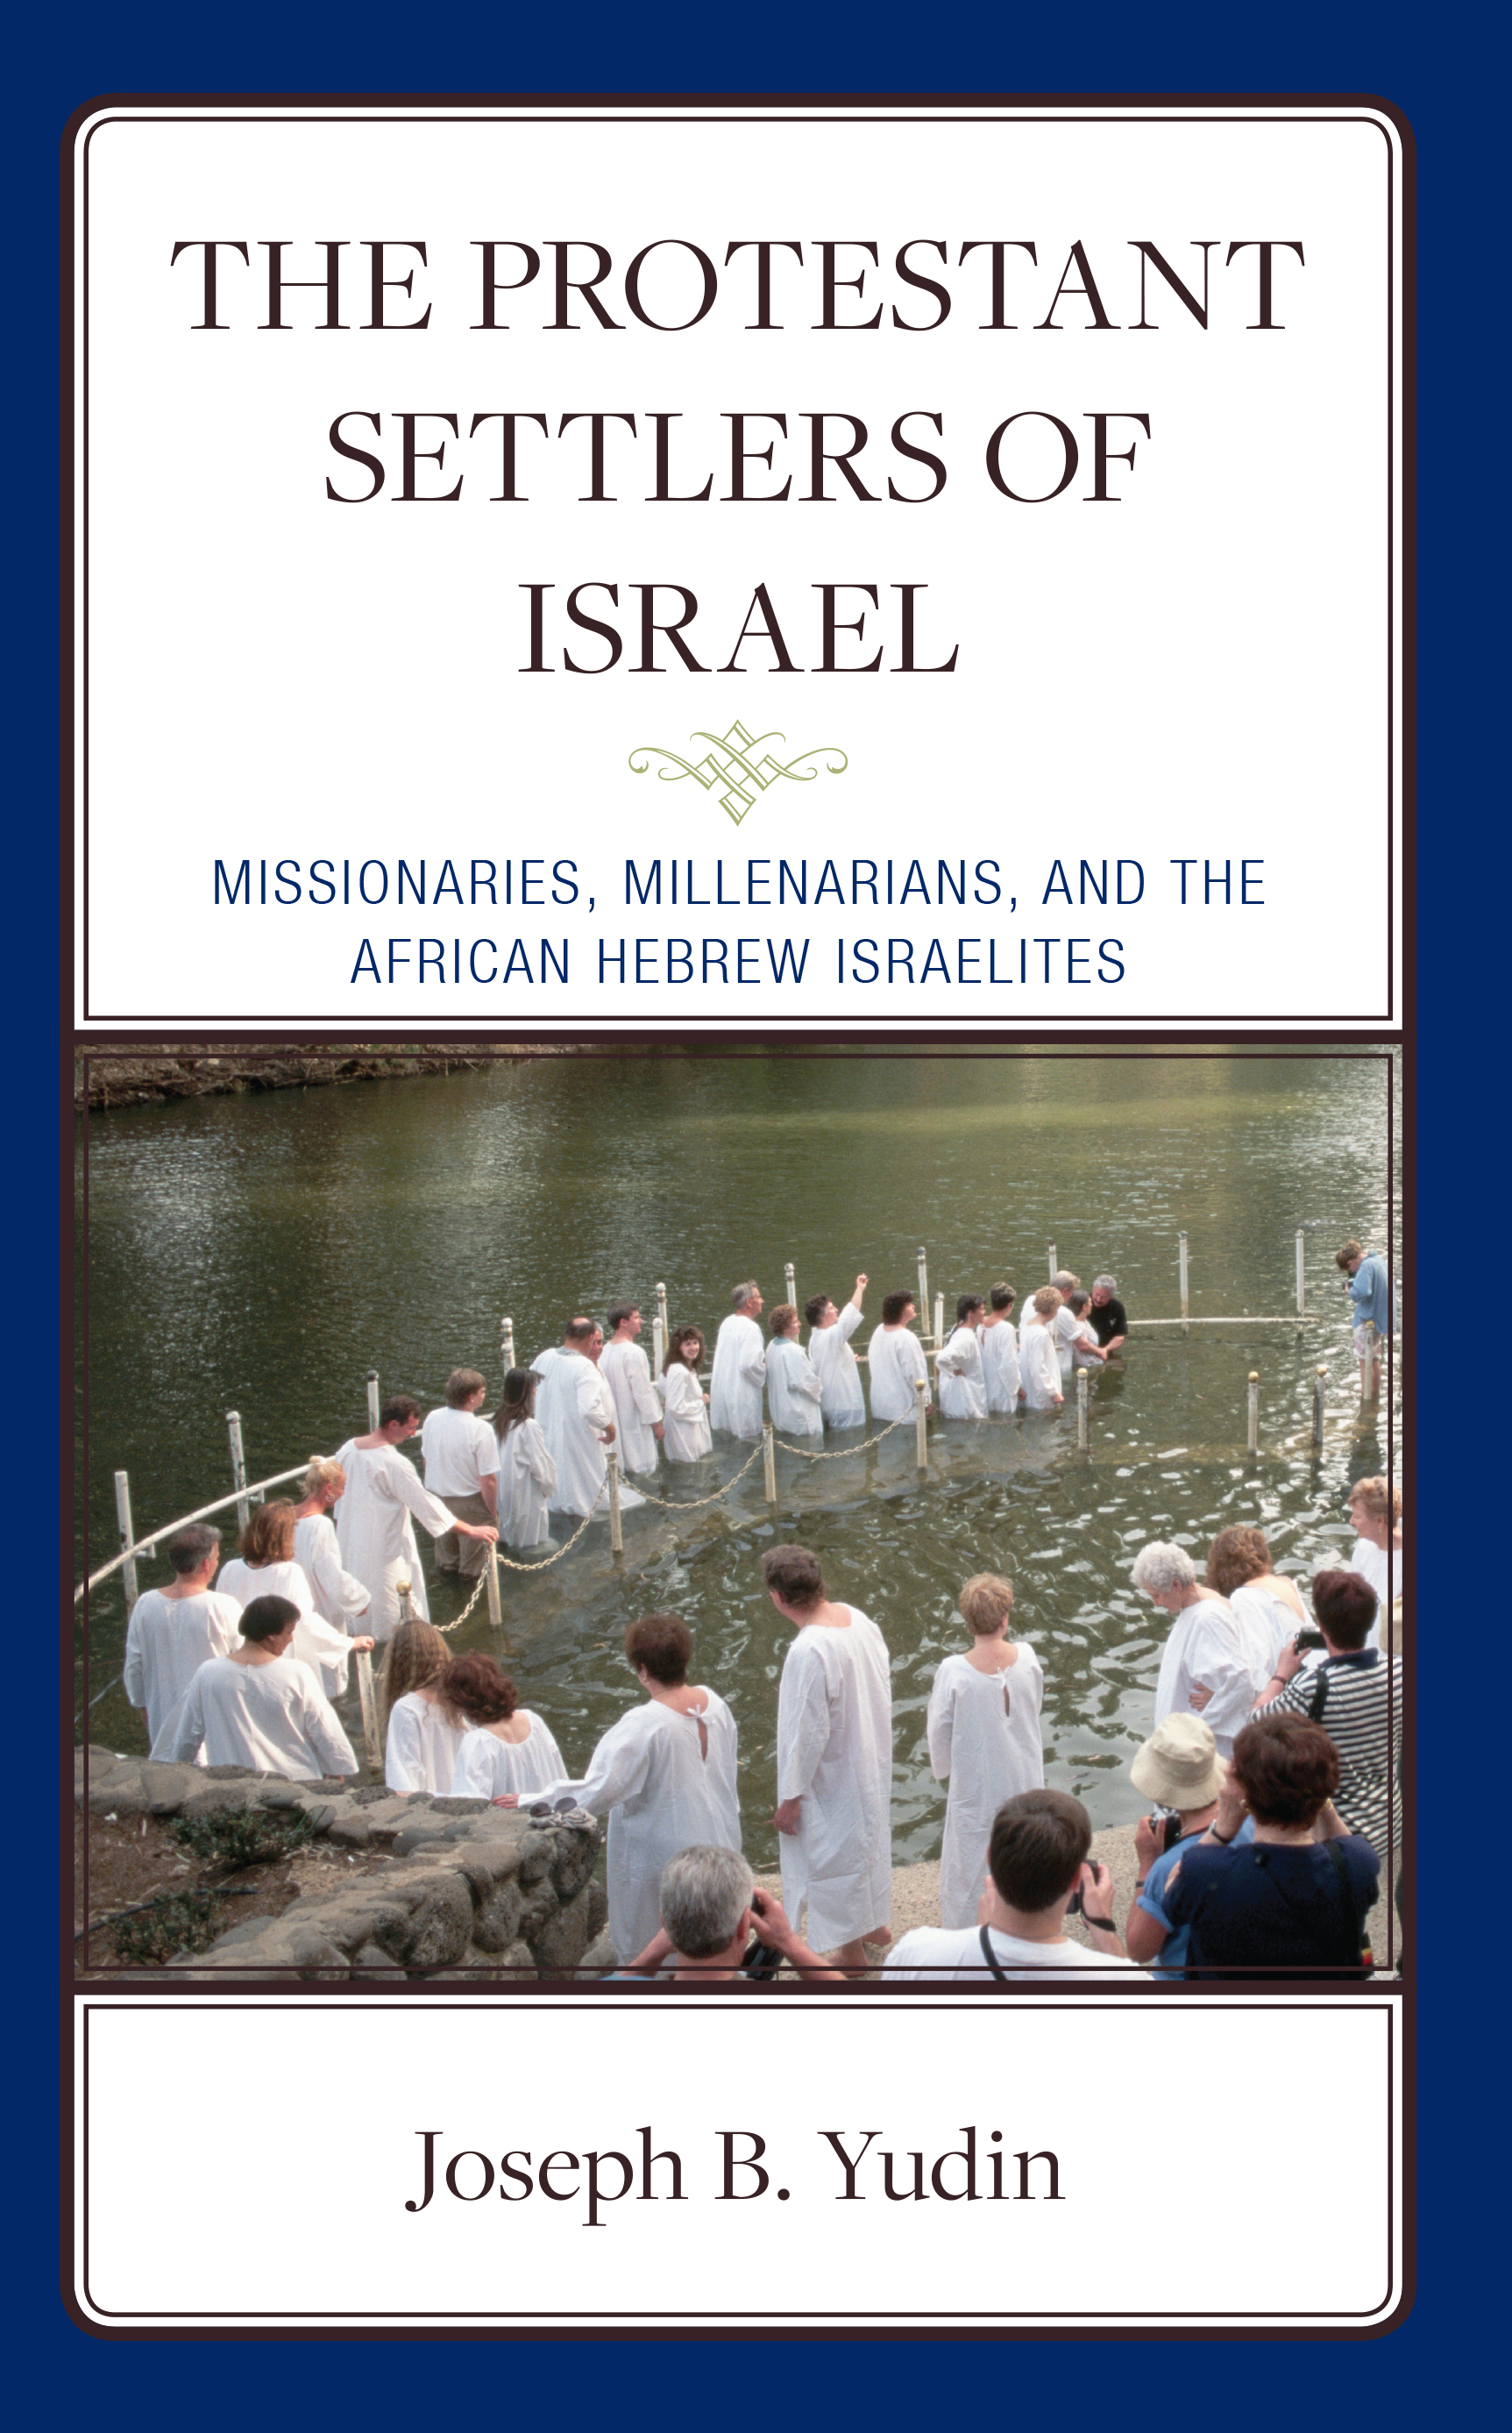 The Protestant Settlers of Israel: Missionaries, Millenarians, and the African Hebrew Israelites